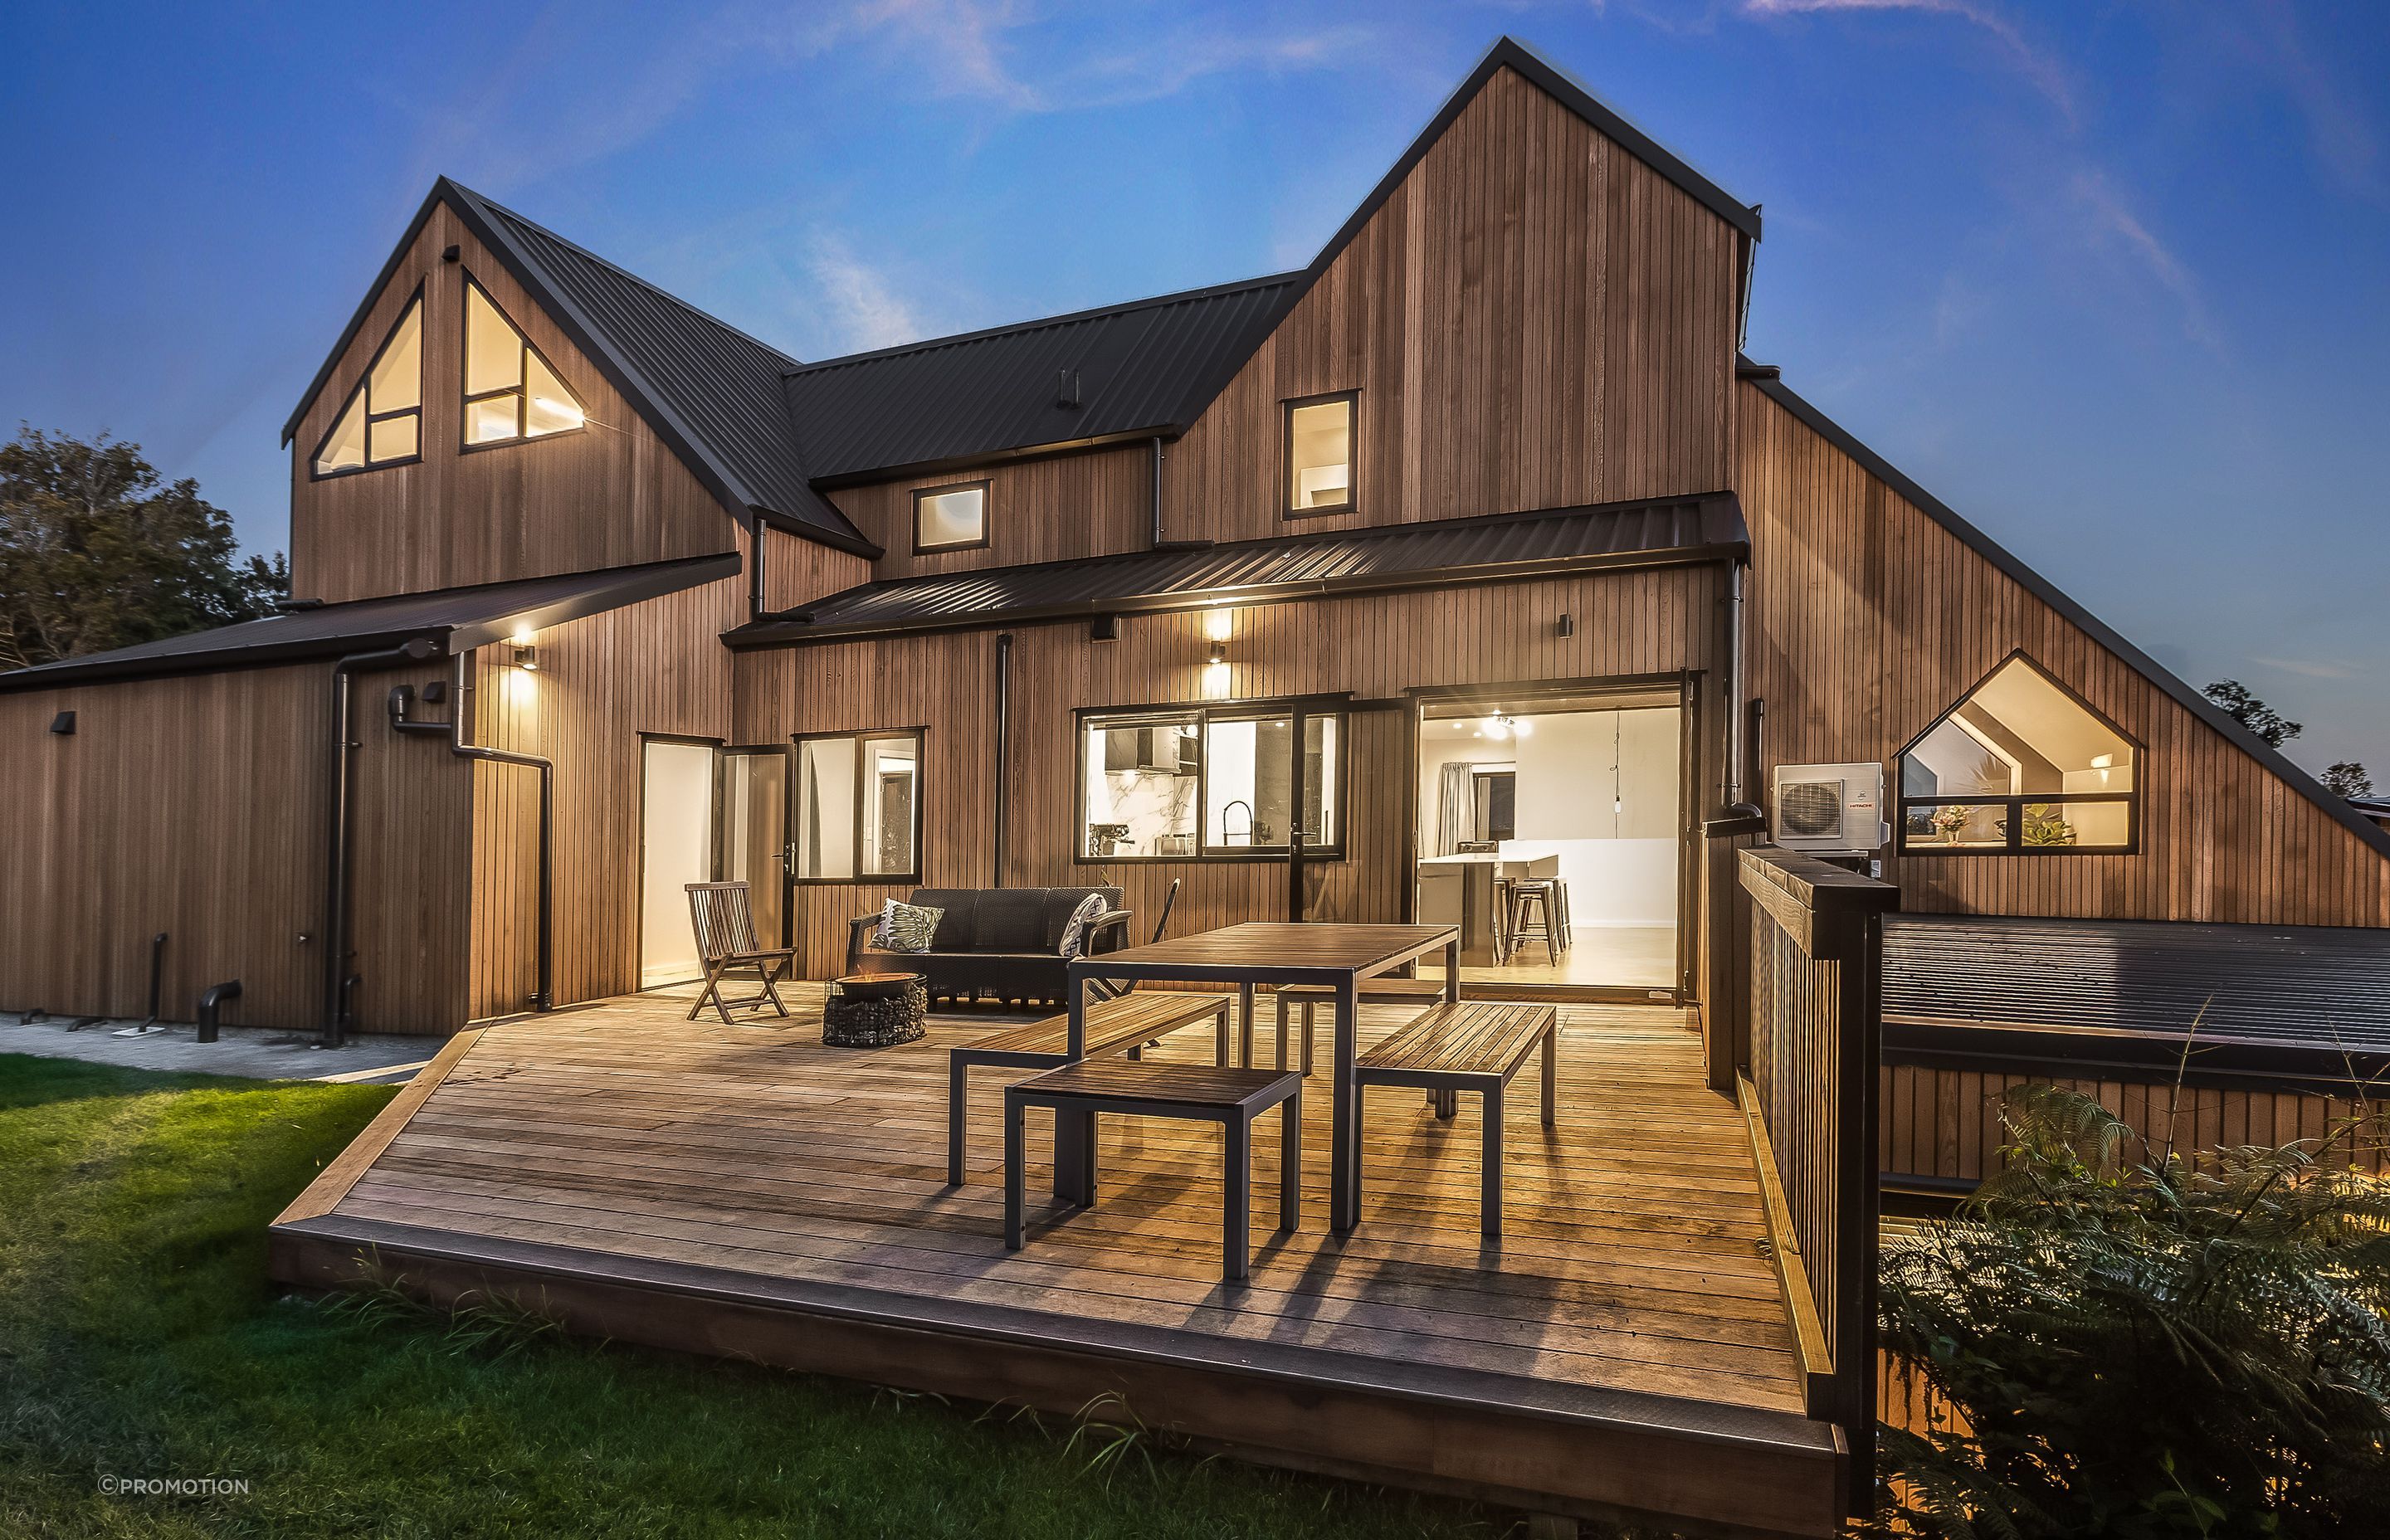 Exterior lighting was planned to highlight the home’s cedar cladding.